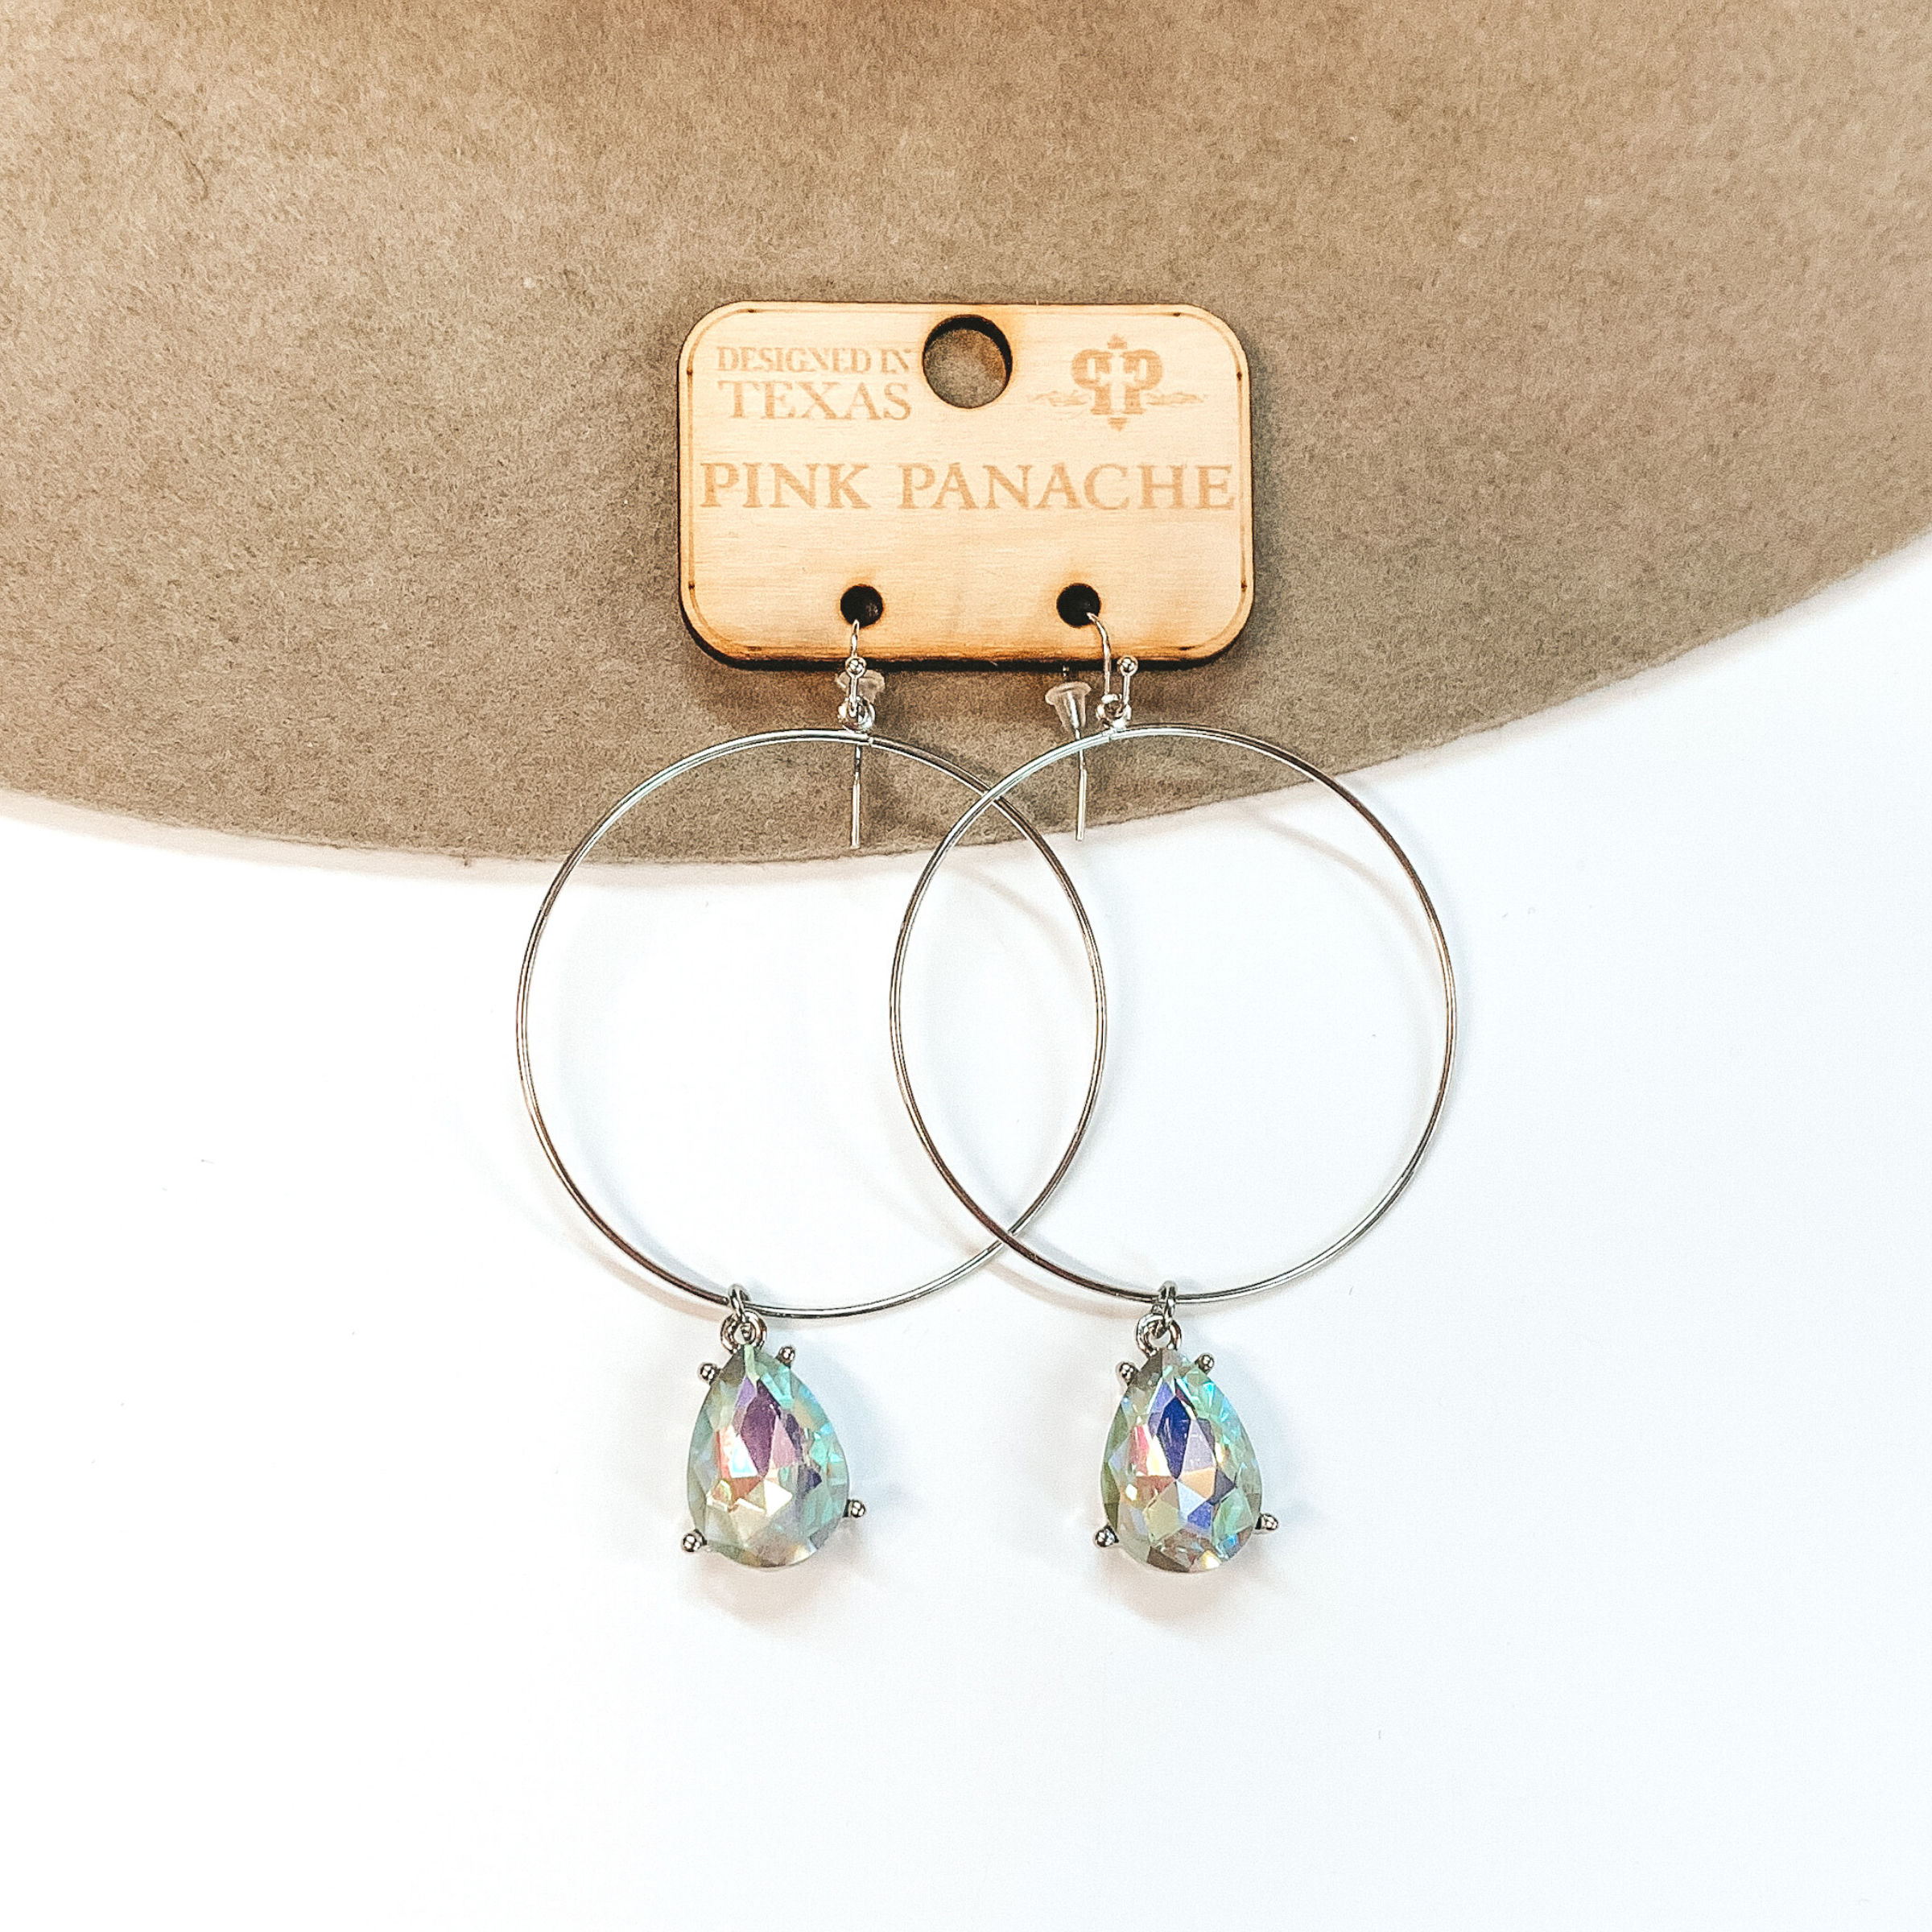 Silver hoop earrings with a teardrop ab crystal dangle. Pictured with a beige hat on a white background.